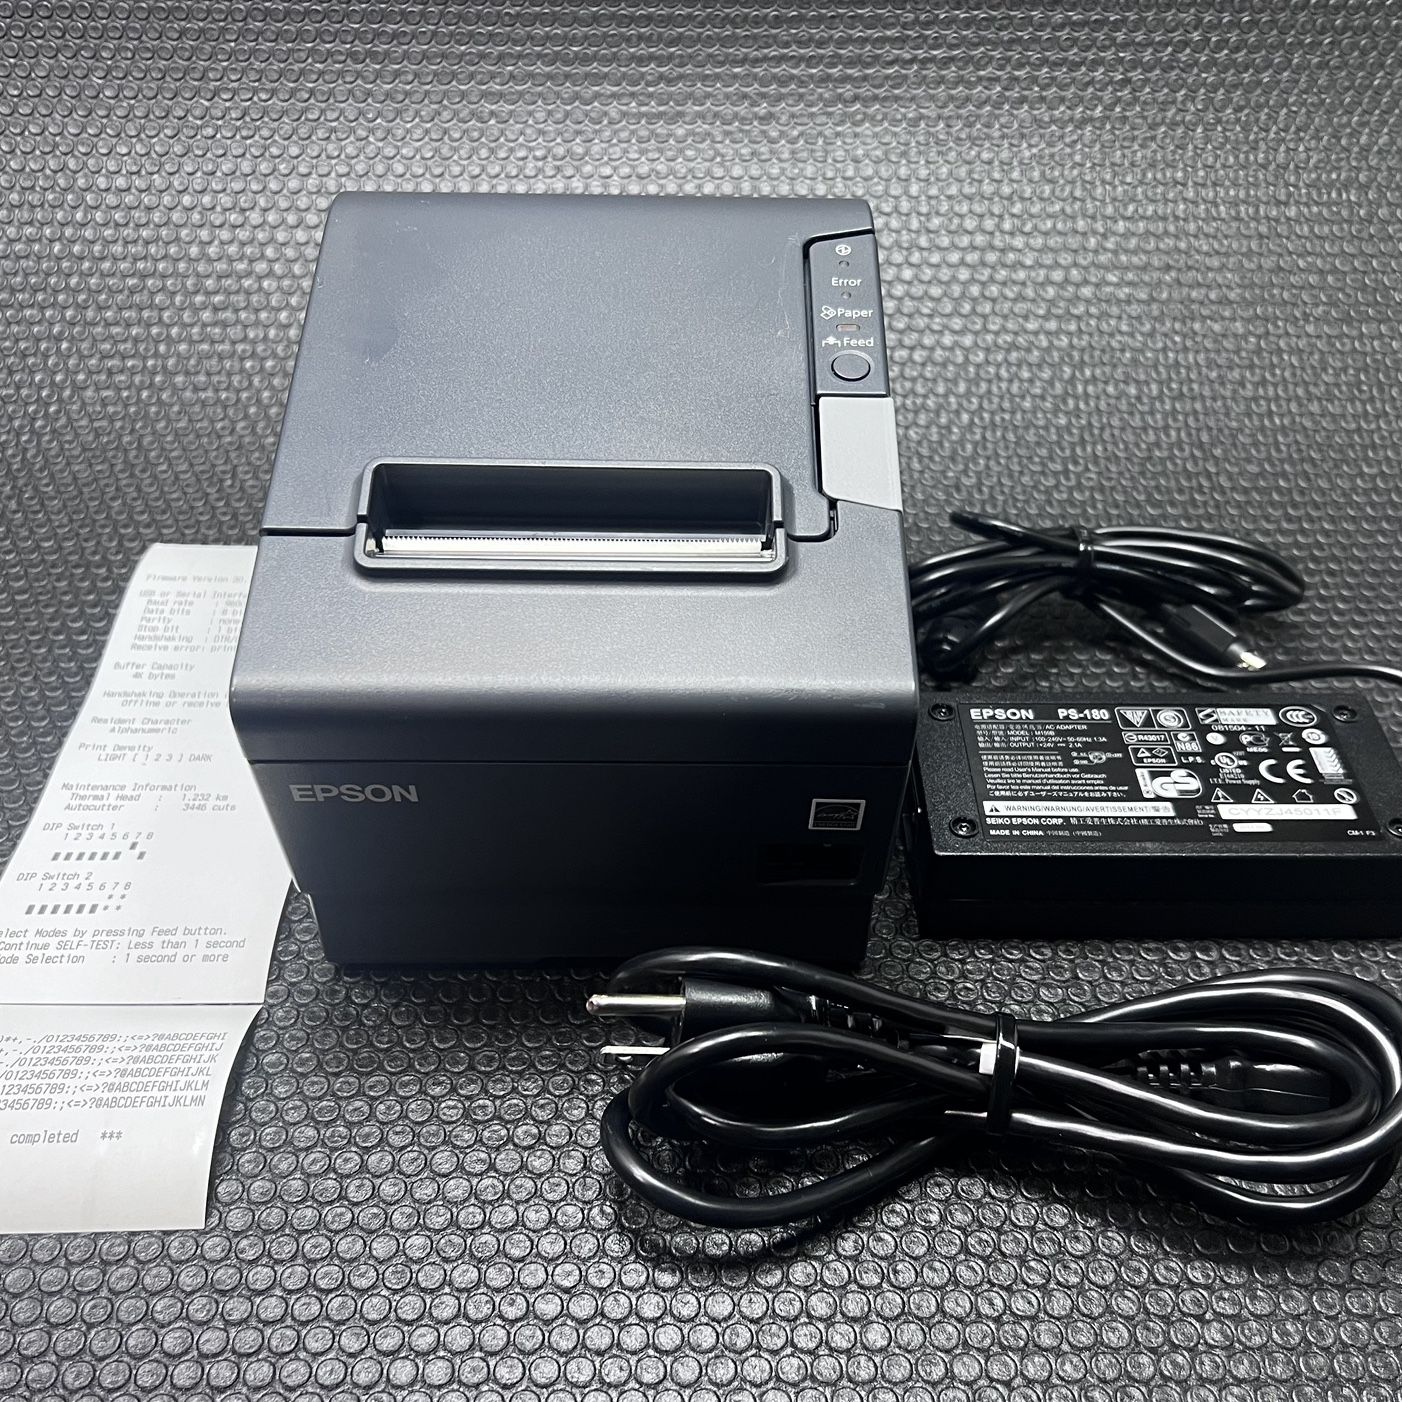 Epson TM-T88V Thermal Receipt Printer M244A w/ Power Adapter Very Good condition